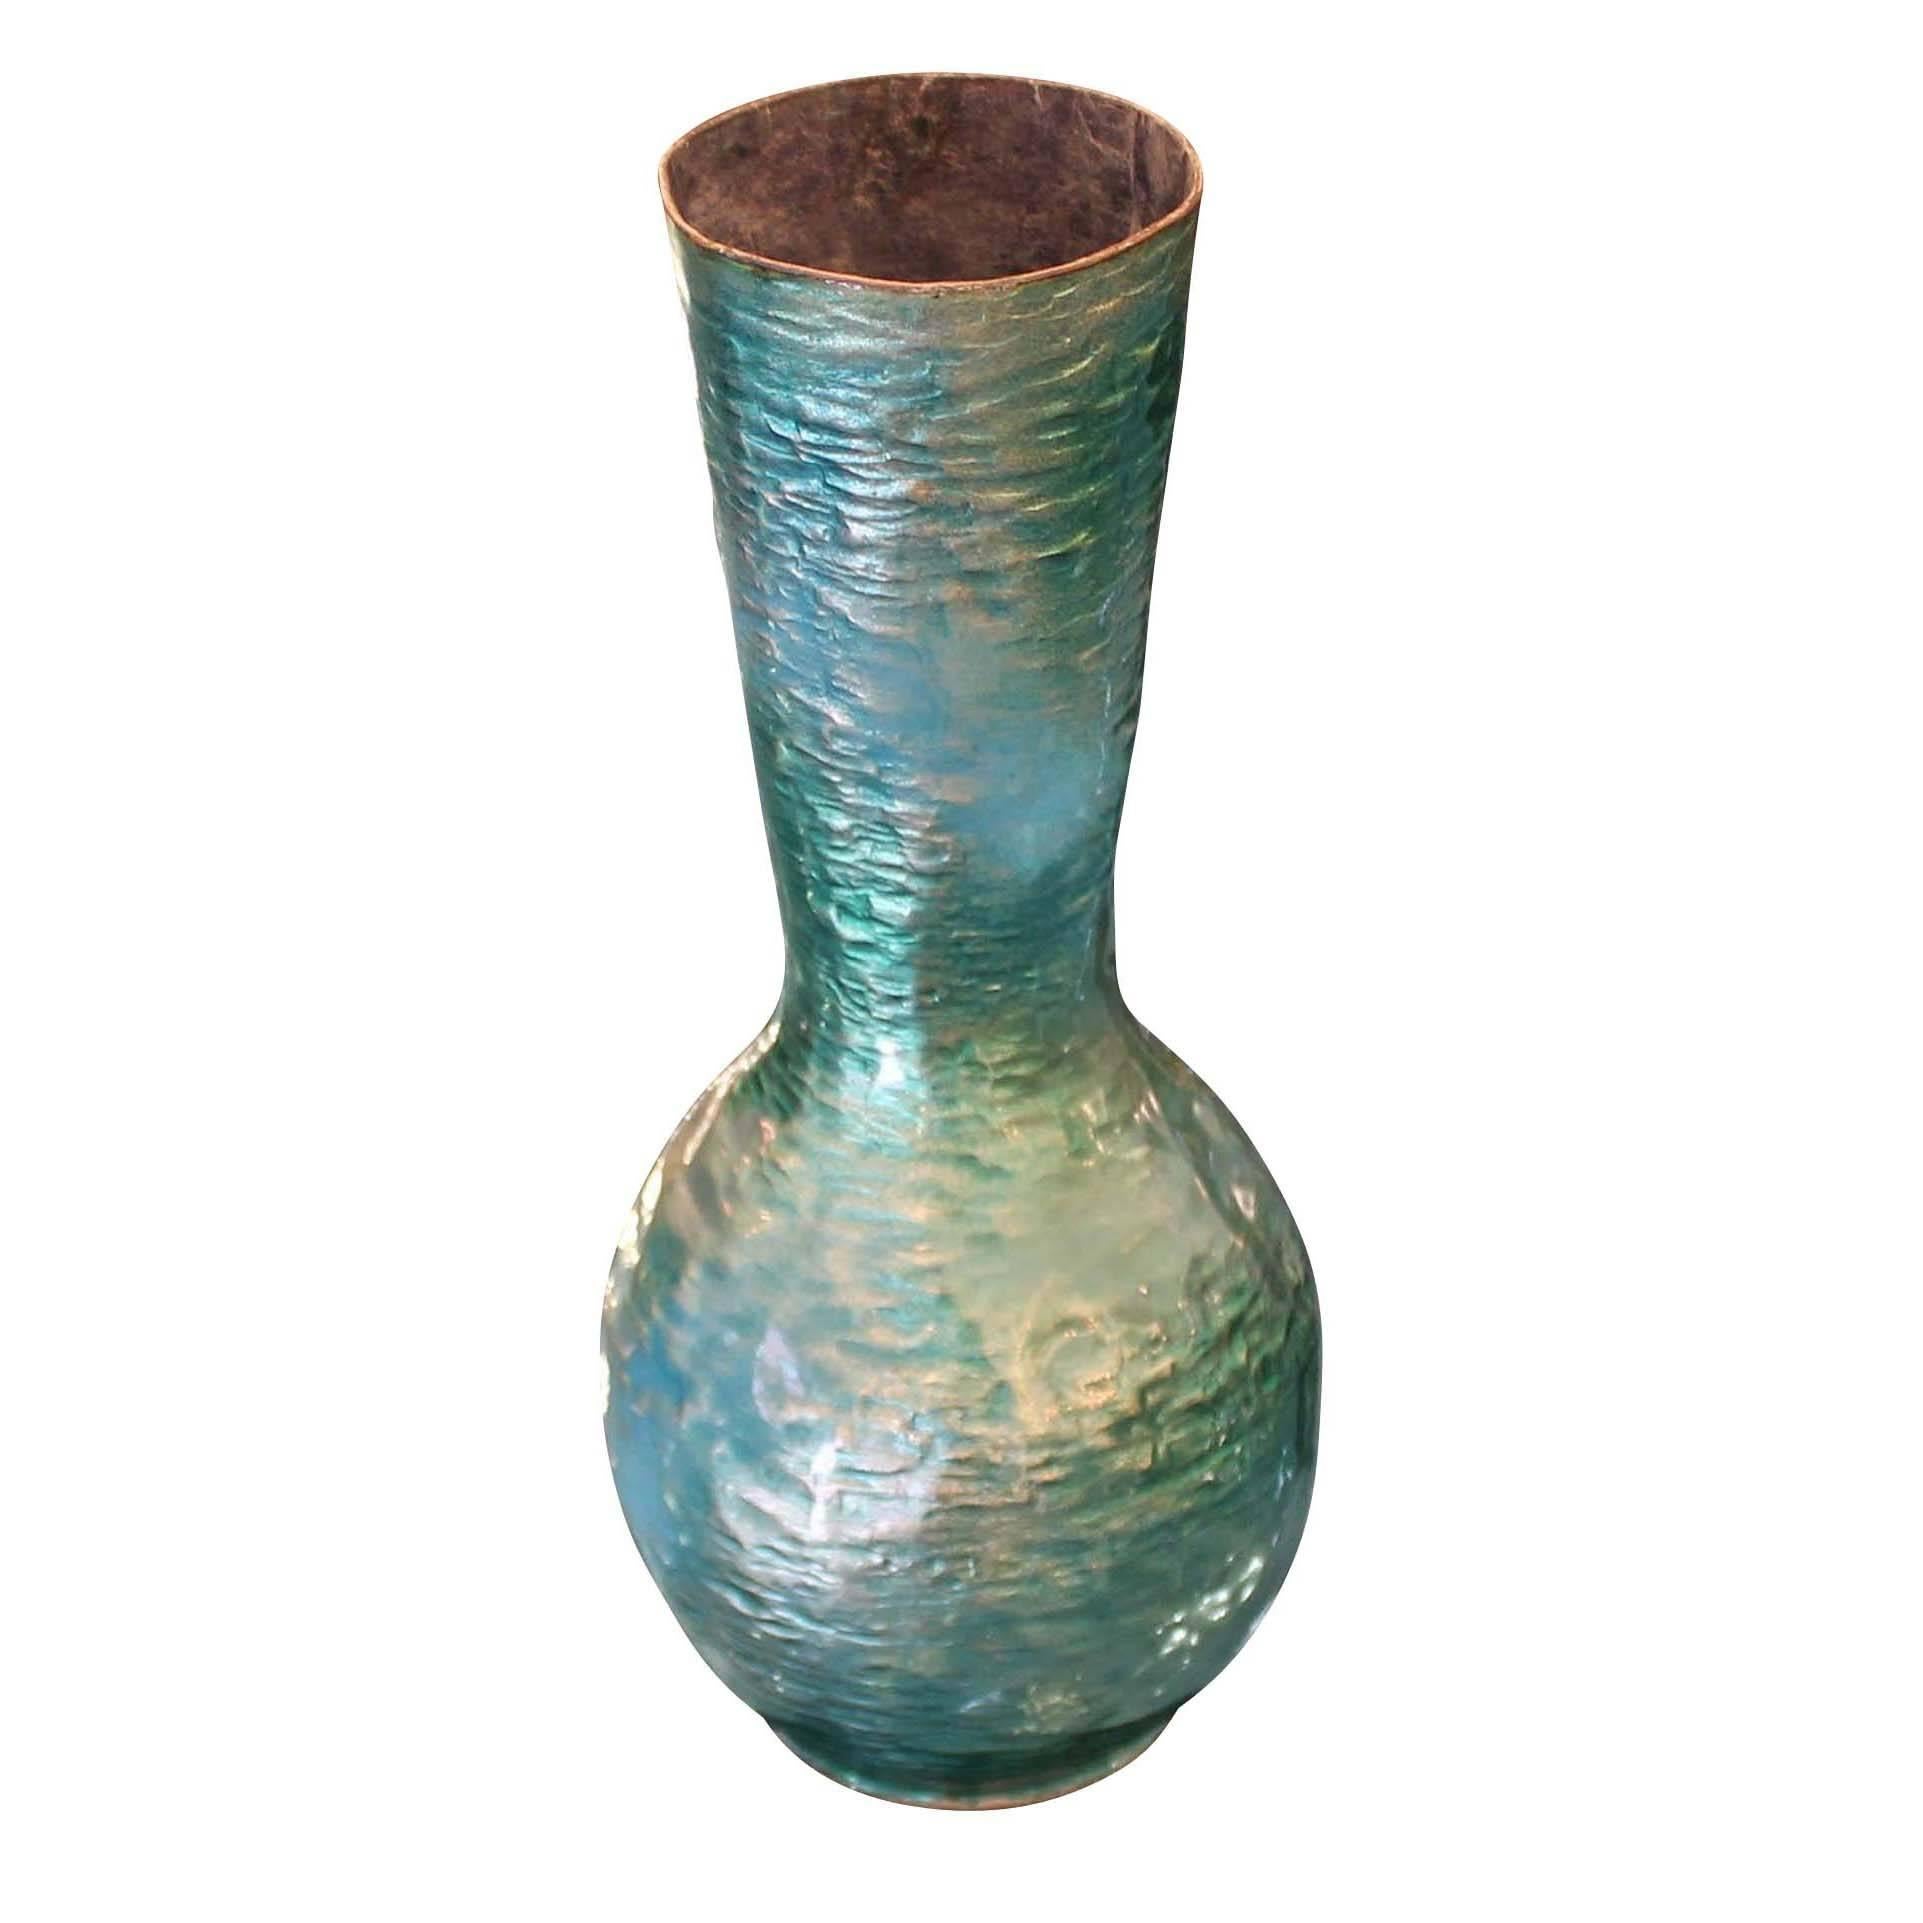 DePoli Enamel, Copper Vase by Gio Ponti with Expertise by the Ponti Archives